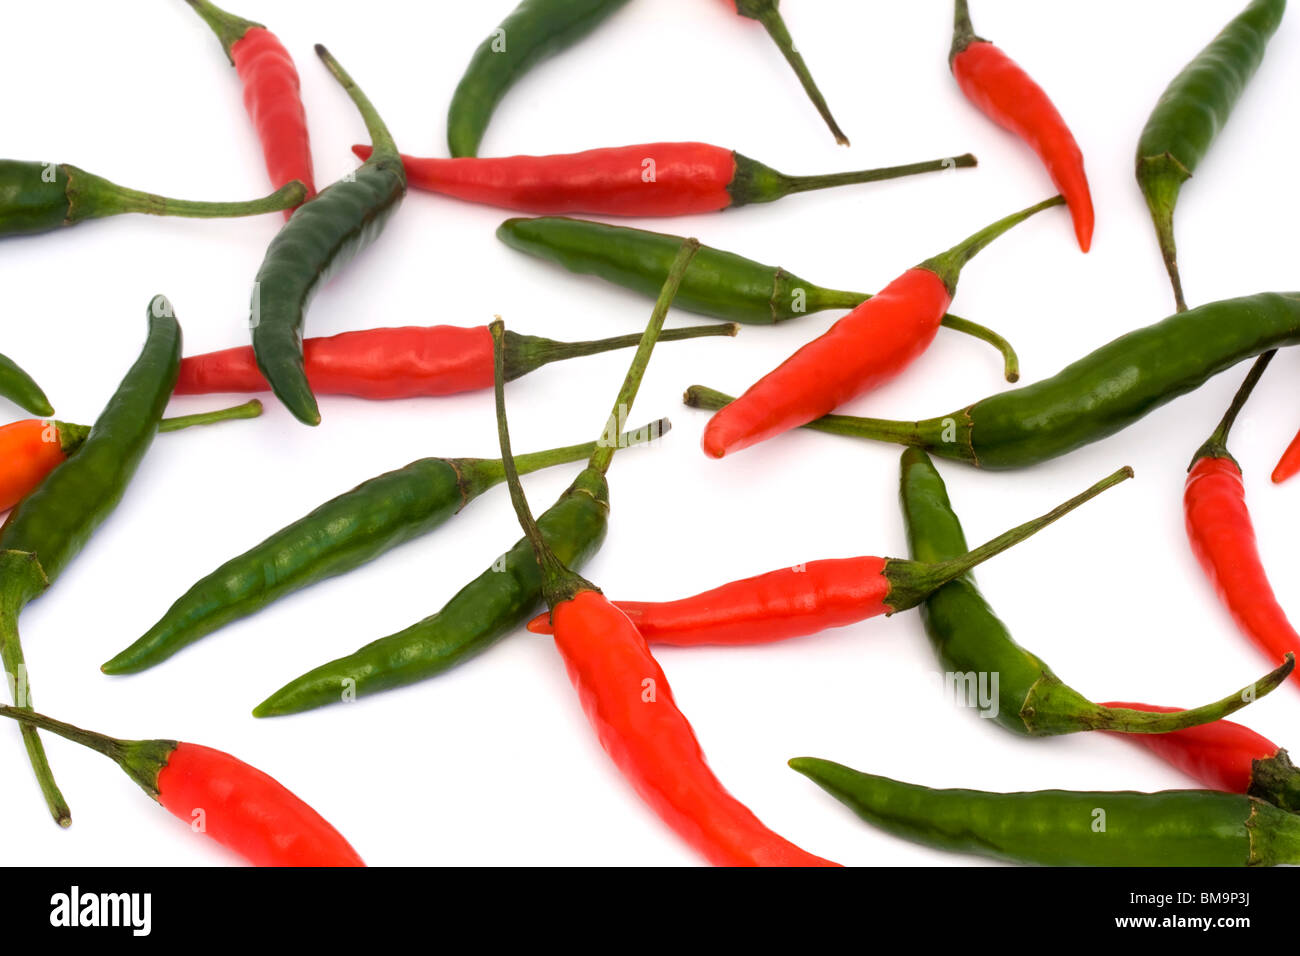 background of red and green chillies on a white background Stock Photo